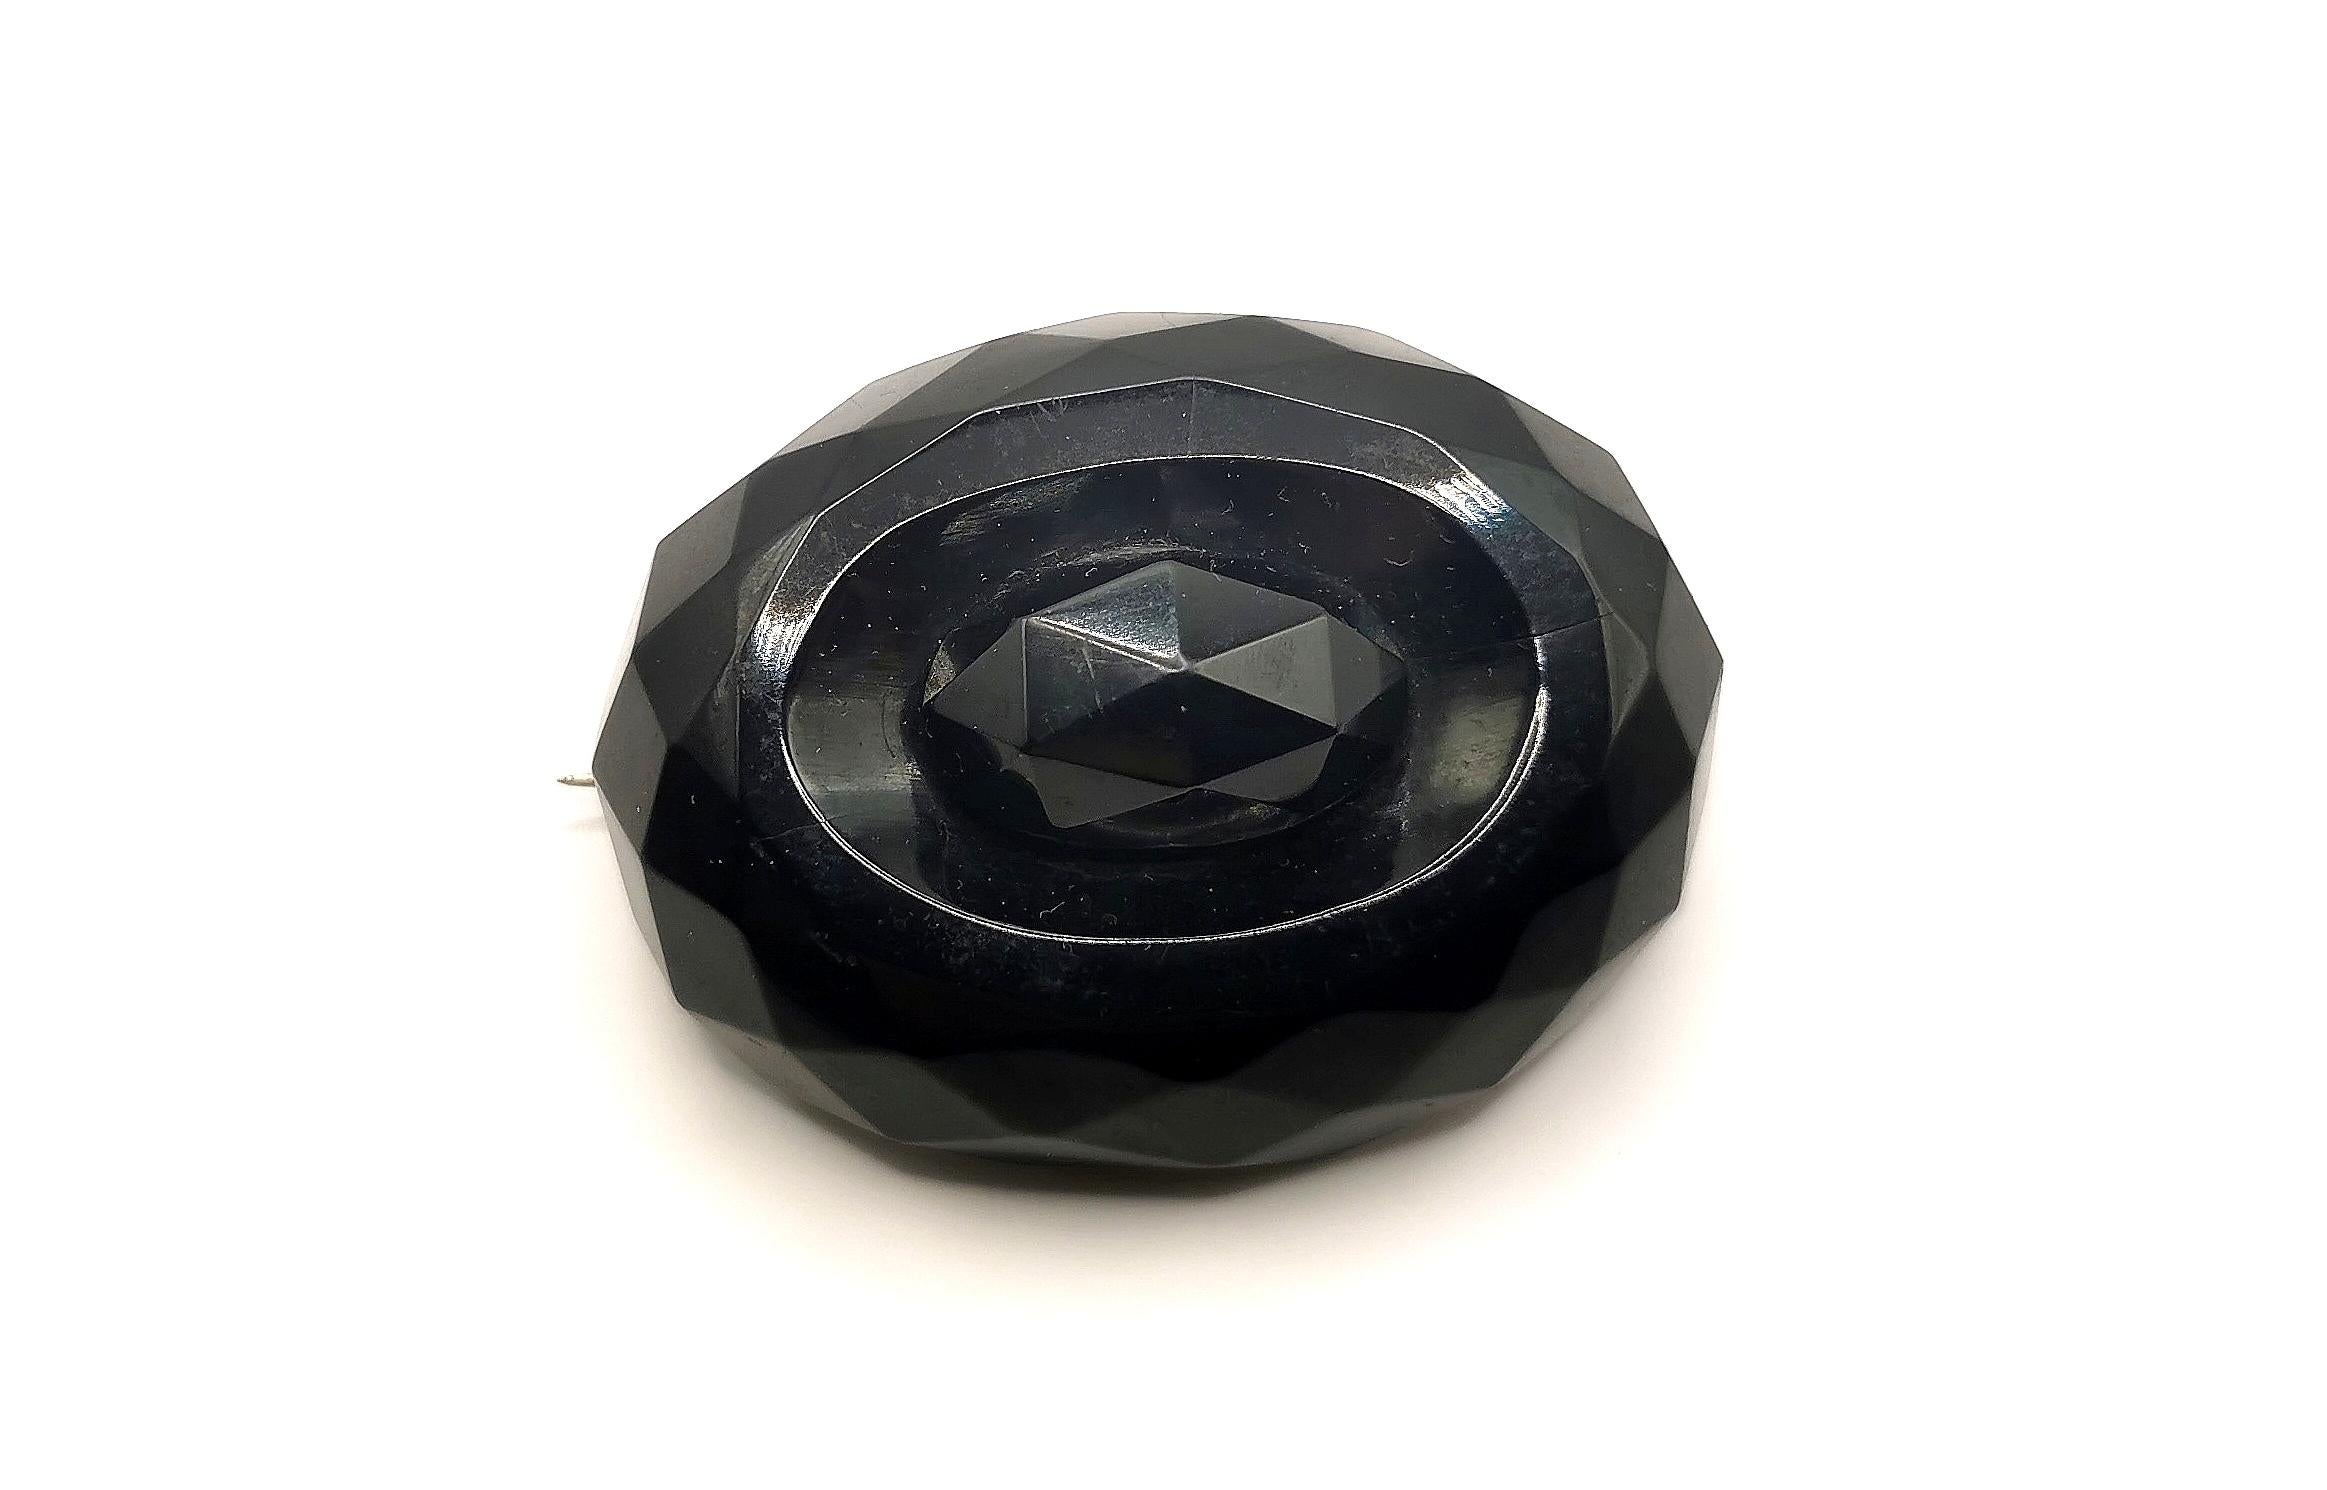 A gorgeous antique Victorian era Whitby Jet brooch.

It is an oval shaped brooch with a faceted design, the facets reflect the light beautifully.

A very attractive brooch.

Whitby Jet shot to popularity in the Victorian era as a material used in